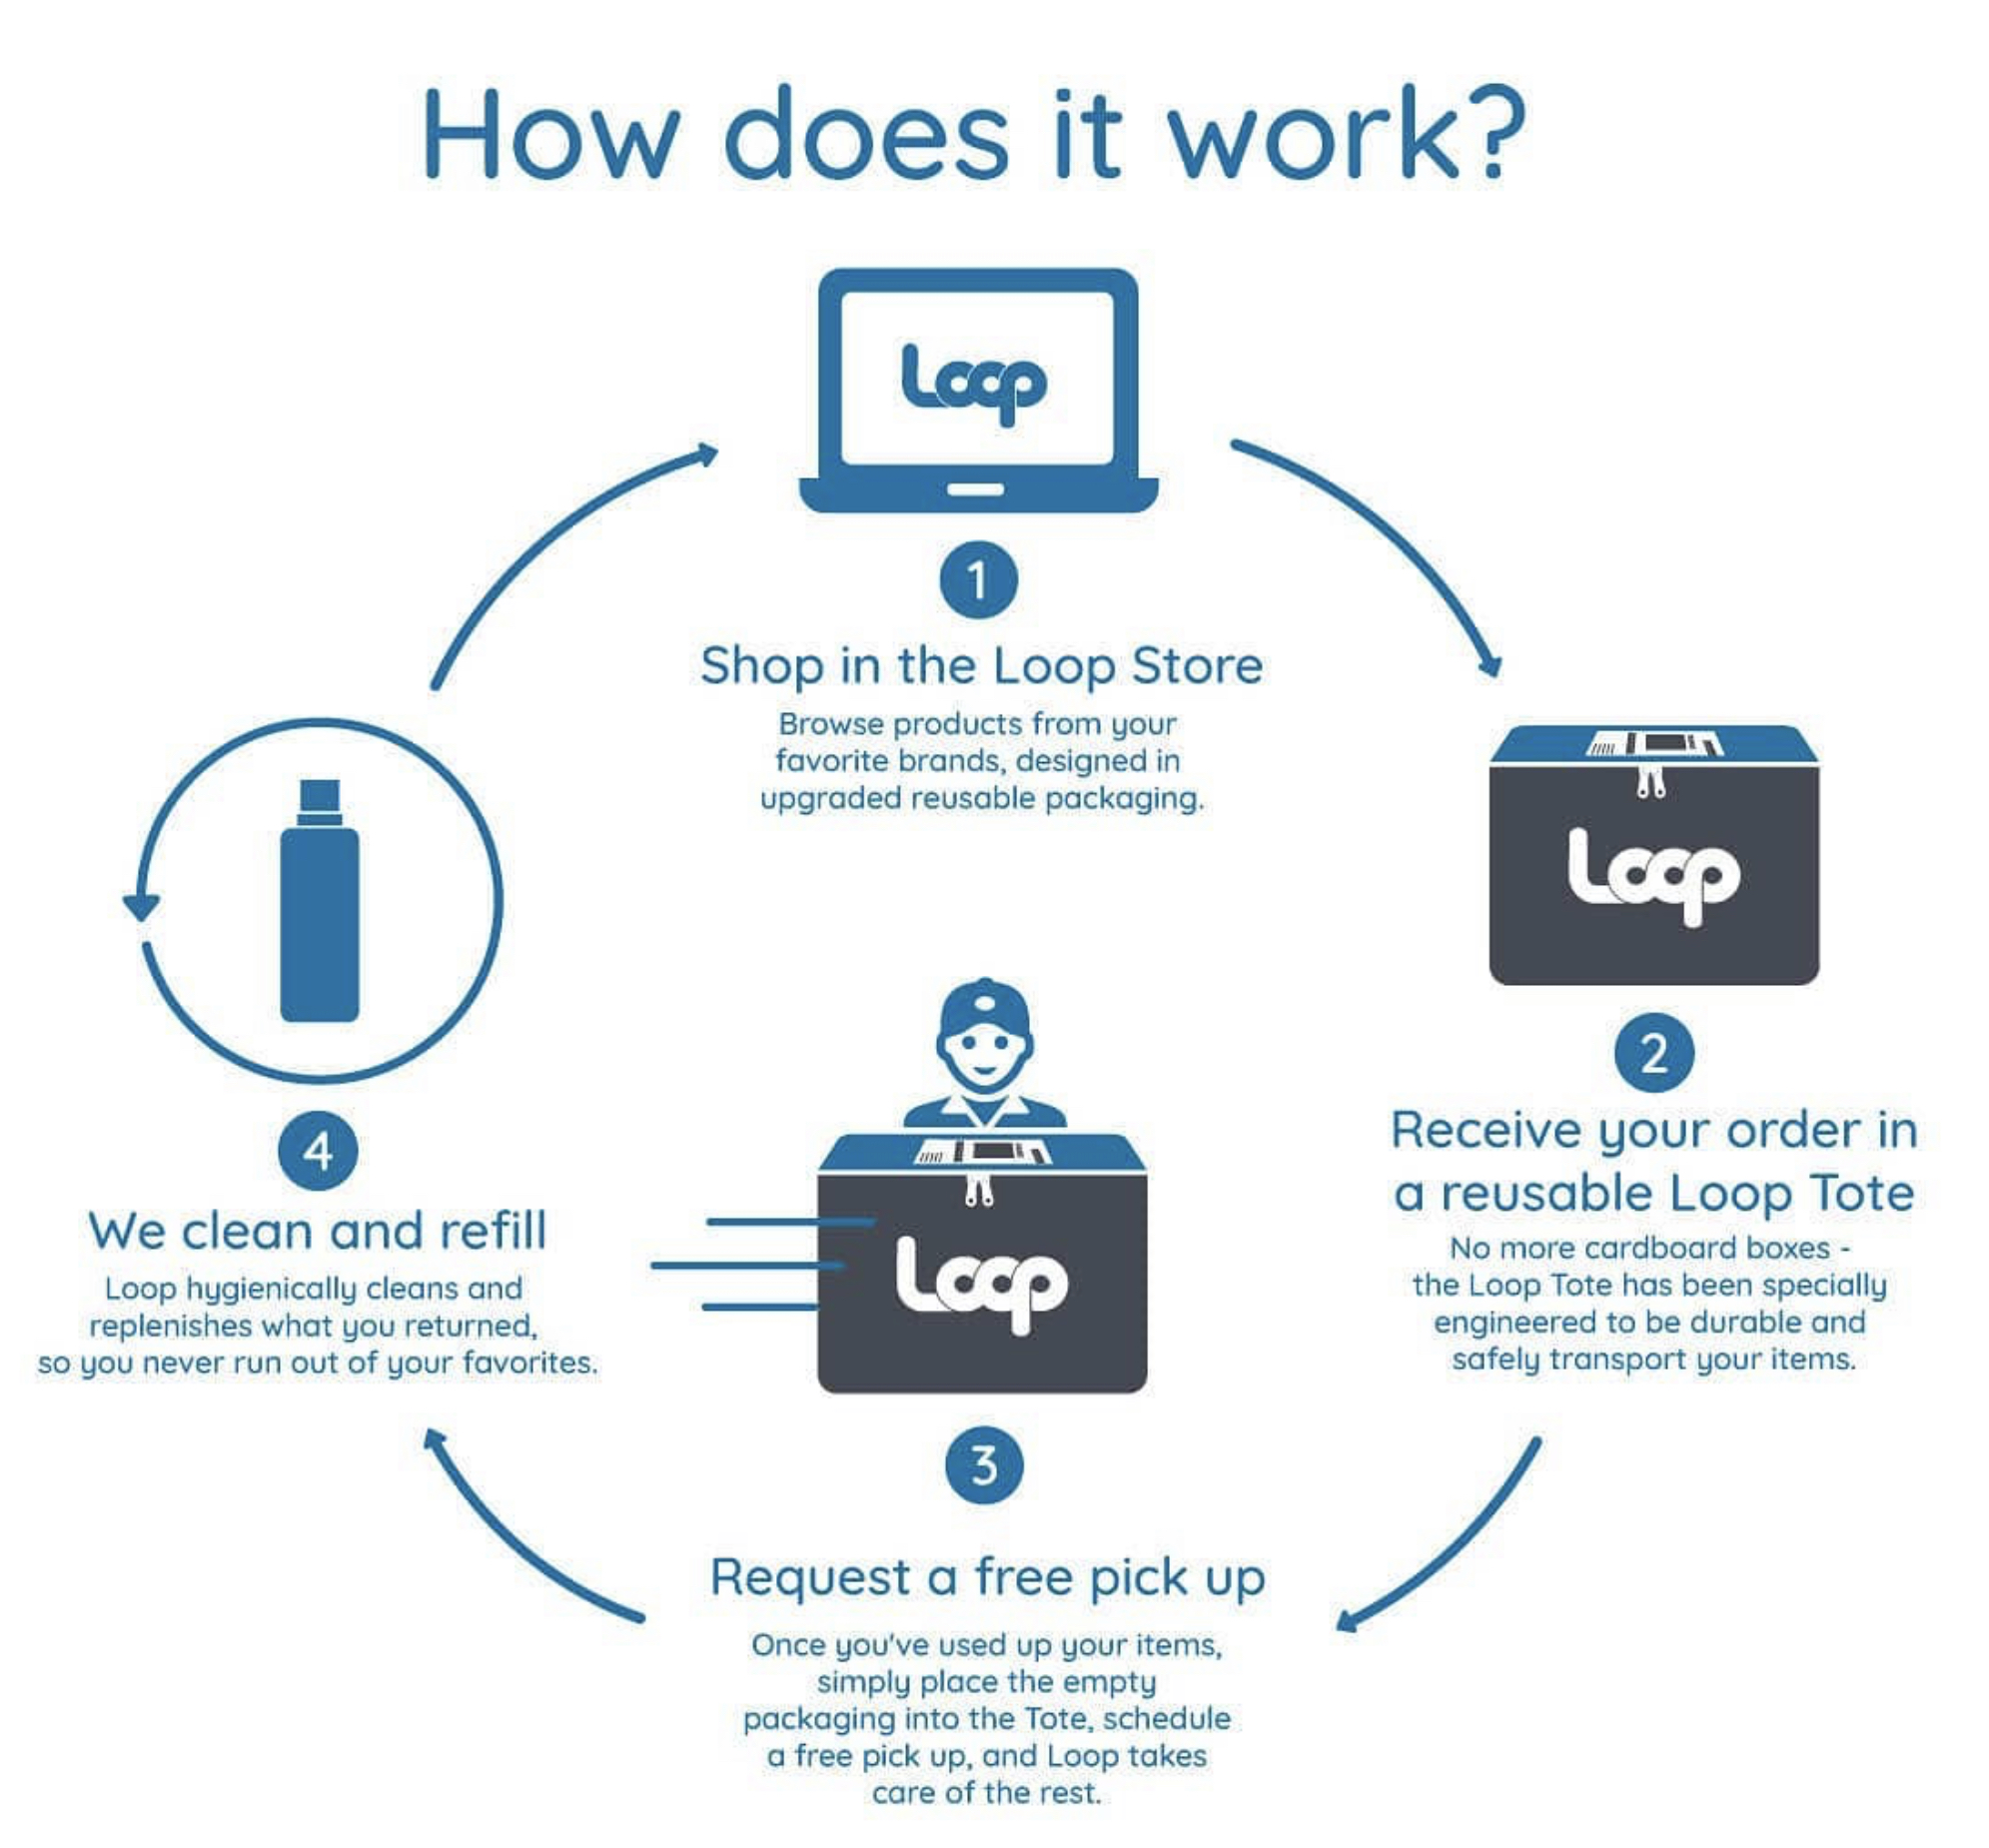 Loop is an initiative that eliminates unnecessary single-use packaging while providing a convenient solution to receiving your favorite products at your doorstep.